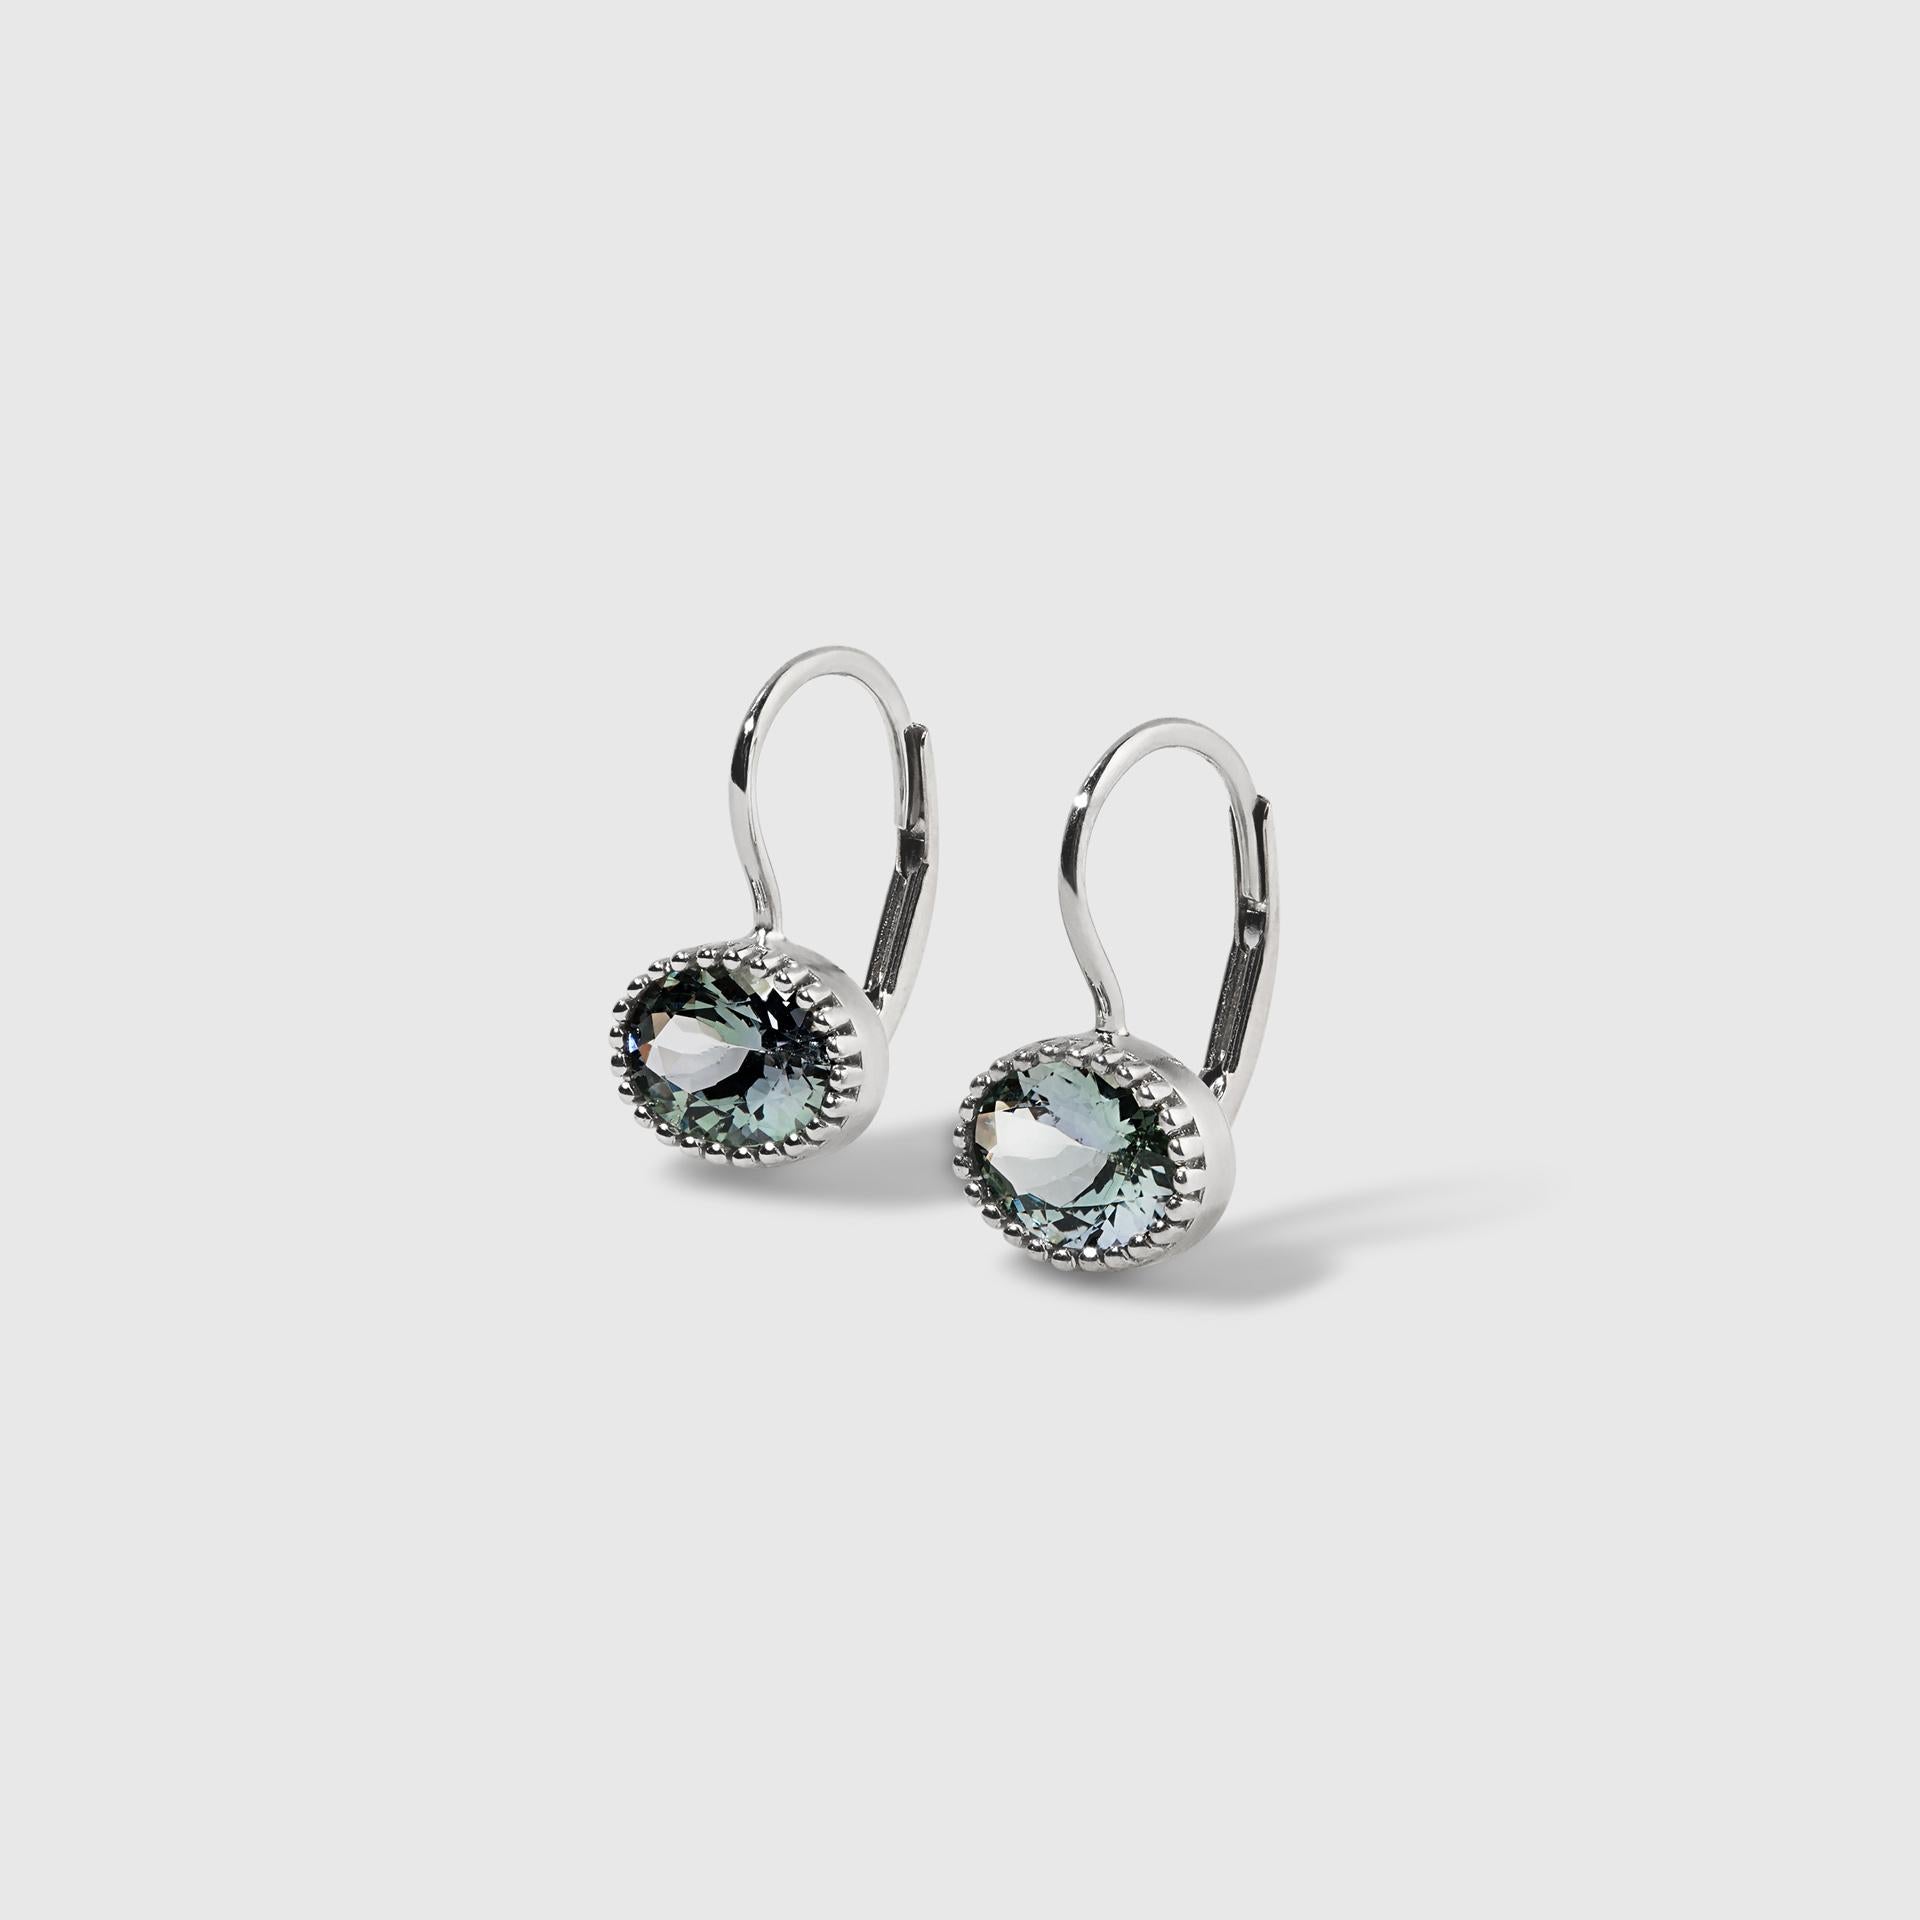 Oval Light Blue-Grey Zoisite Earrings, 14kt White Gold by Ashley Childs In New Condition For Sale In Bozeman, MT